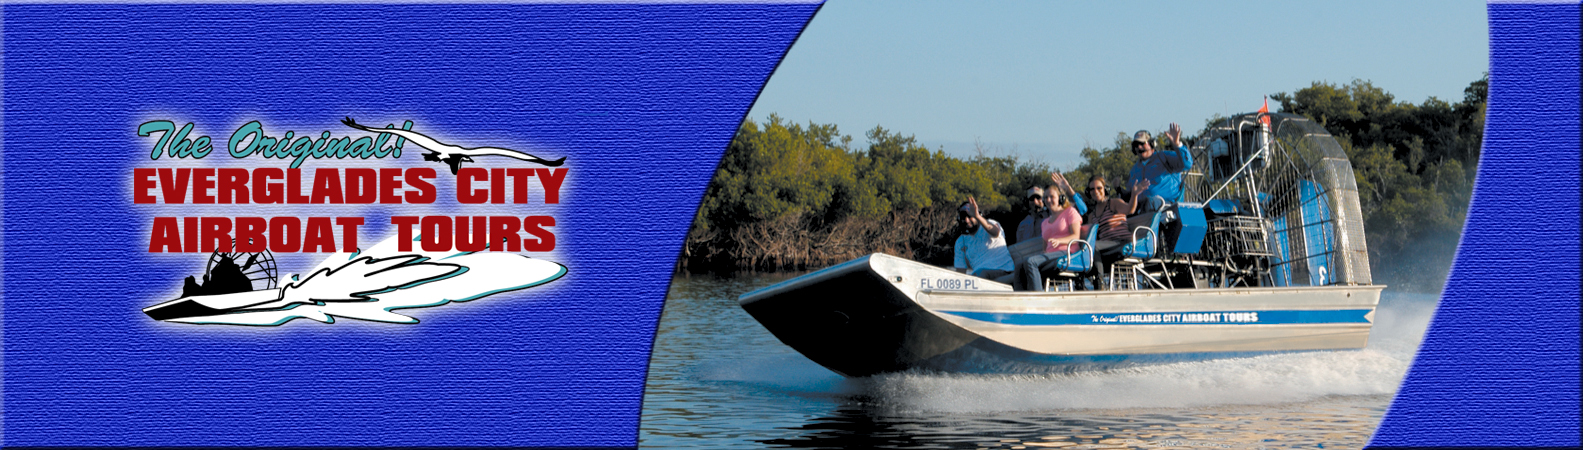 everglades airboat tours coupons